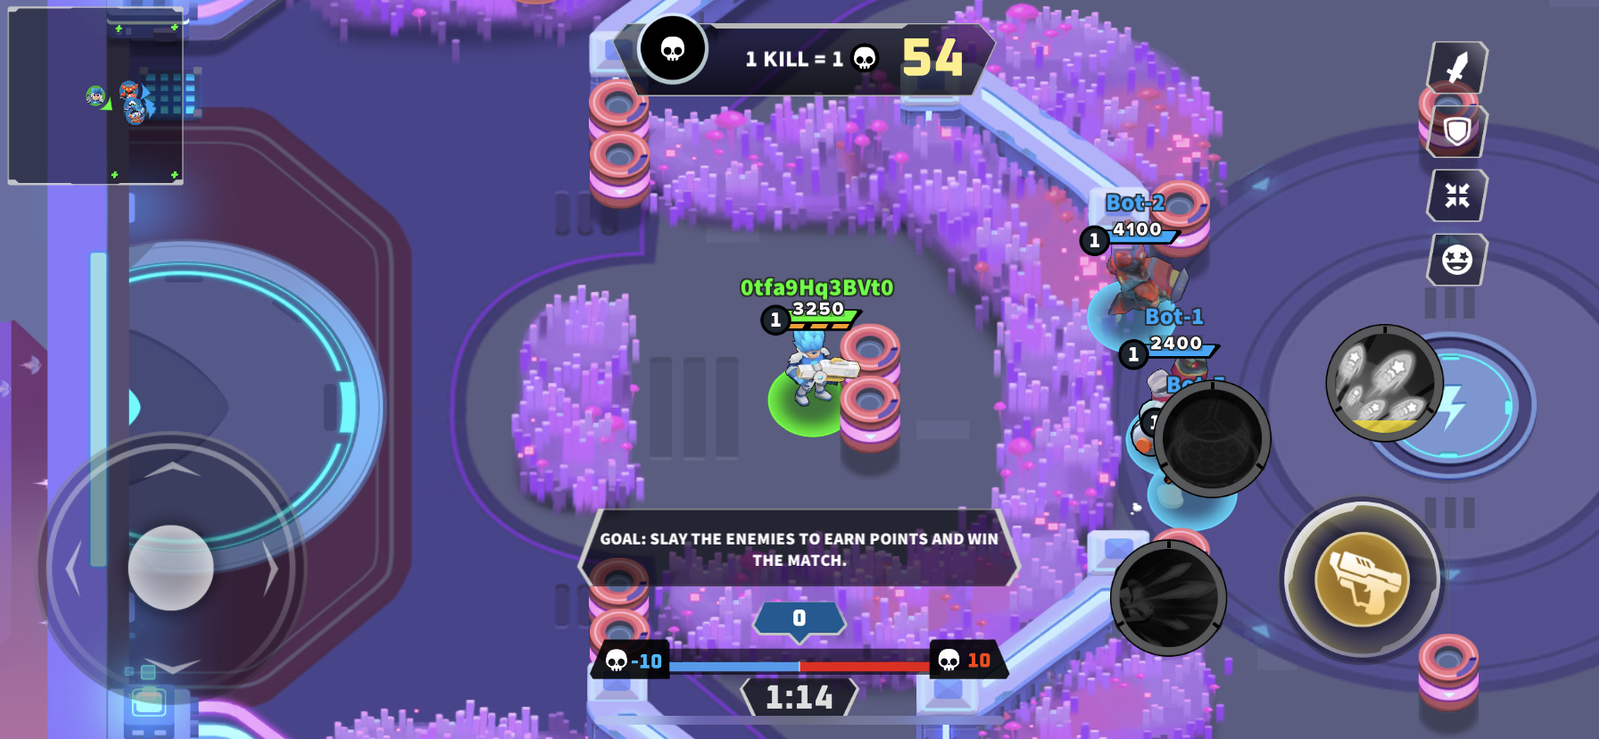 Screenshot from Thetan Arena, showing a player moving through the arena to battle